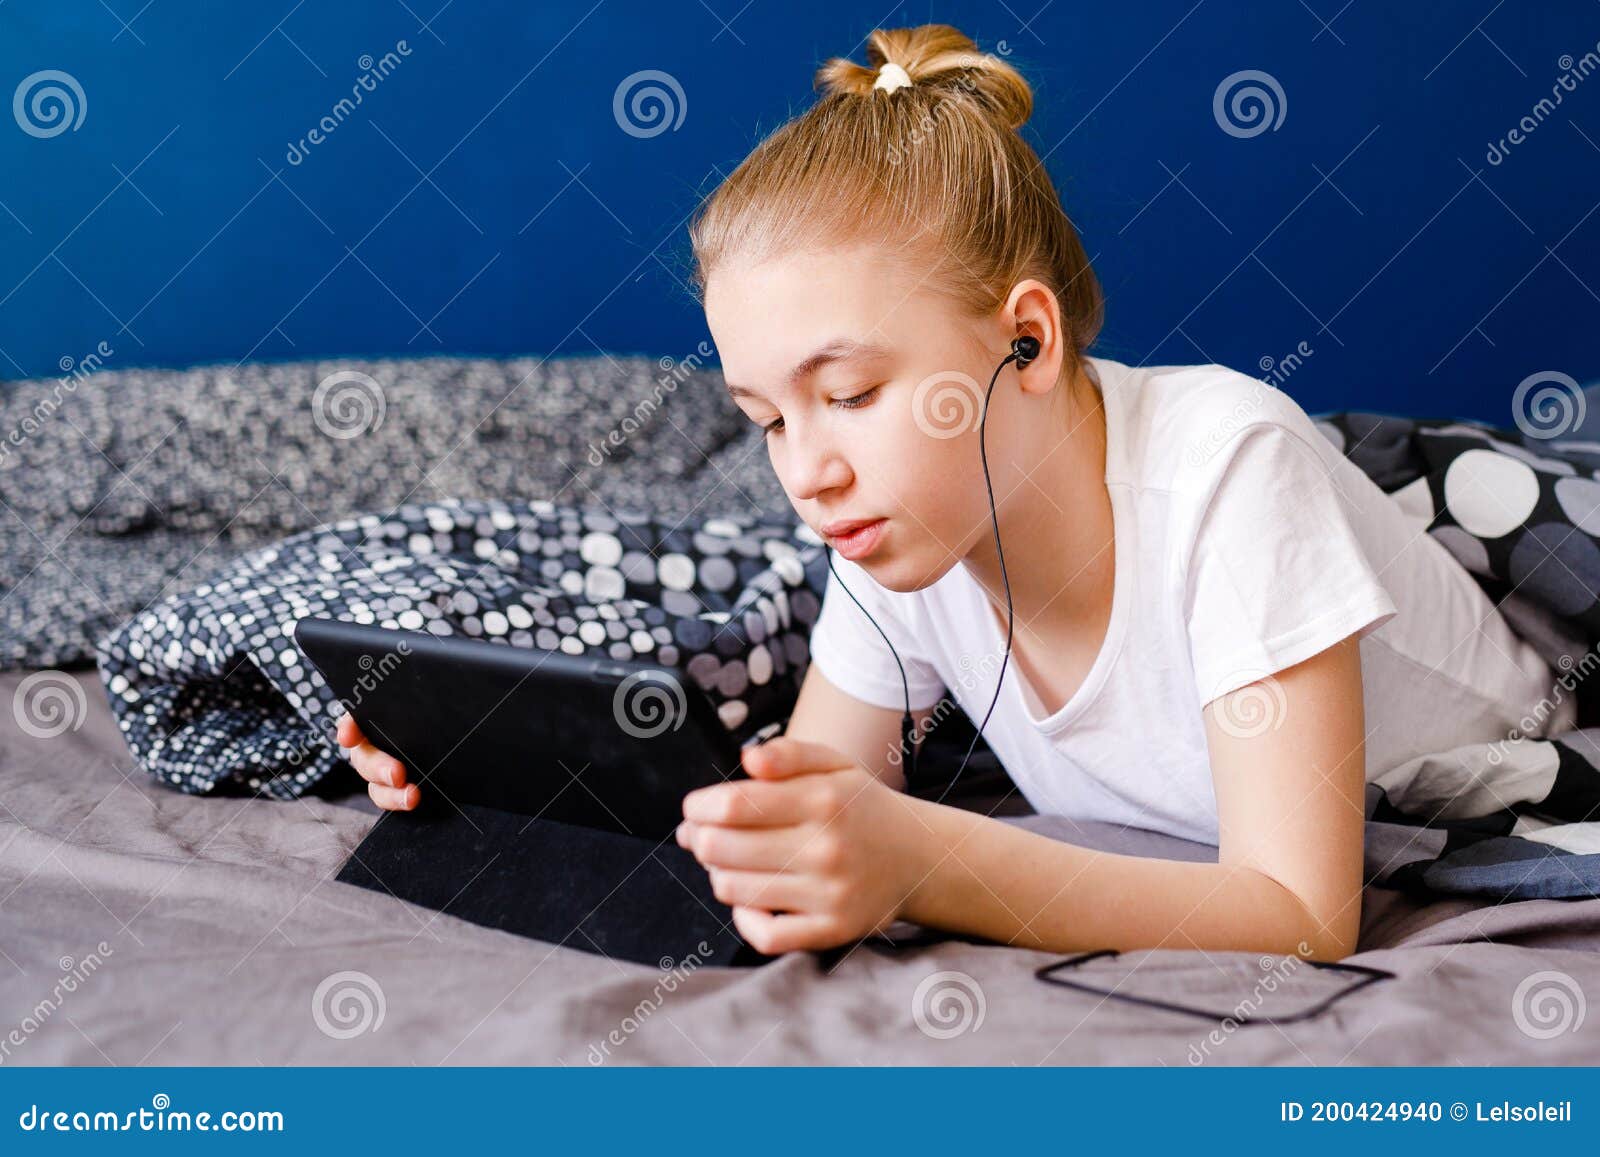 Cute Blonde Teen Girl Watching Video on Smartphone on the Bed, Child ...